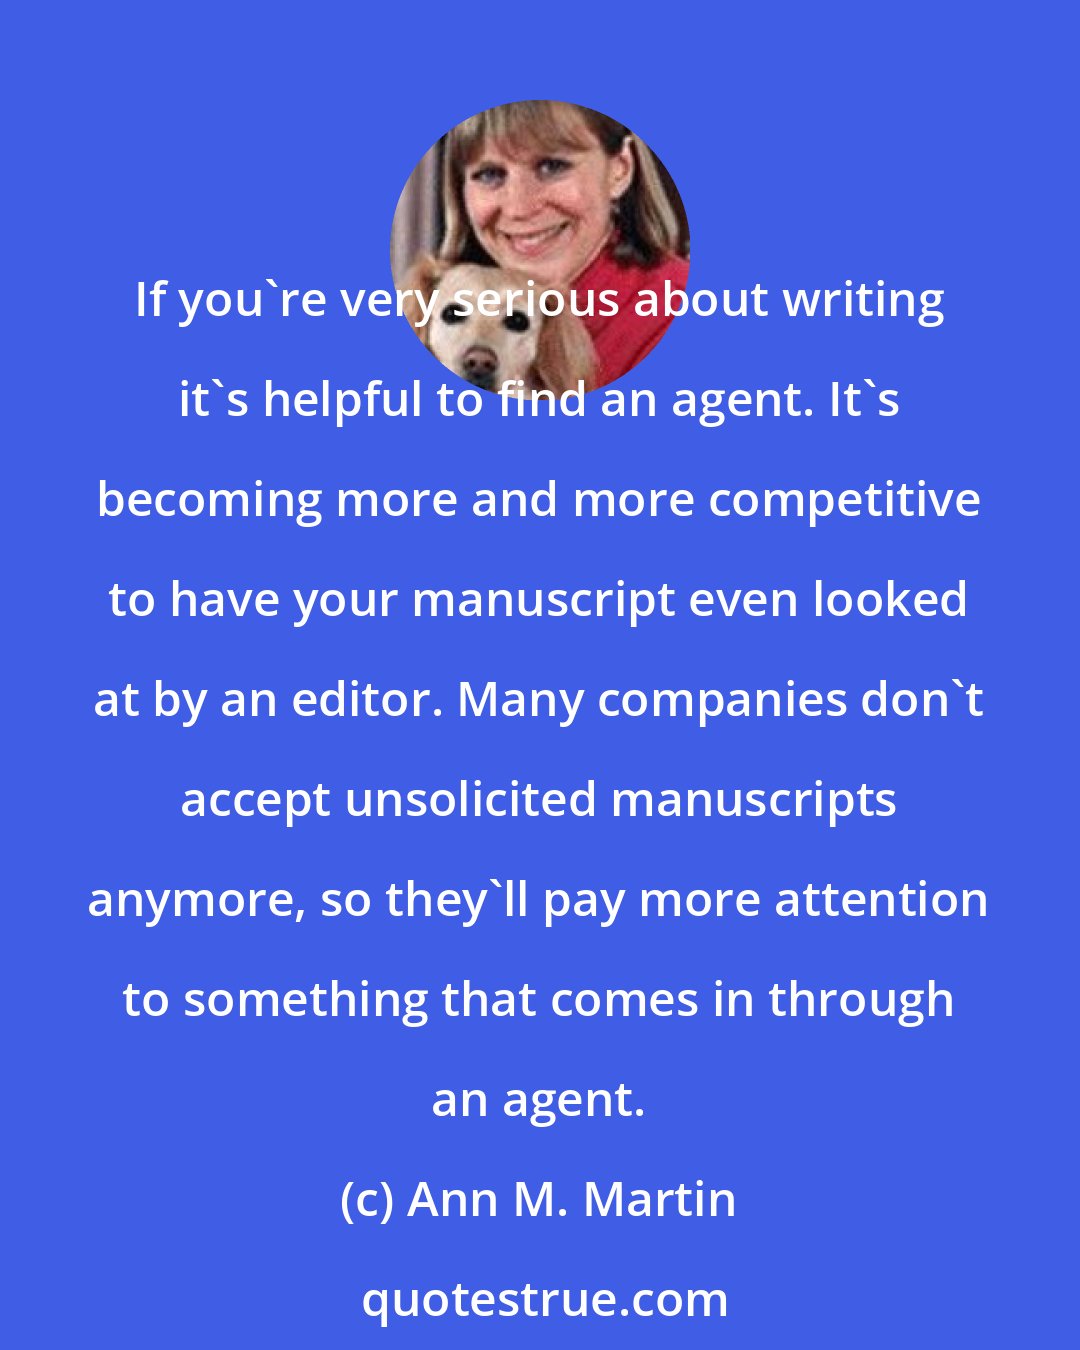 Ann M. Martin: If you're very serious about writing it's helpful to find an agent. It's becoming more and more competitive to have your manuscript even looked at by an editor. Many companies don't accept unsolicited manuscripts anymore, so they'll pay more attention to something that comes in through an agent.